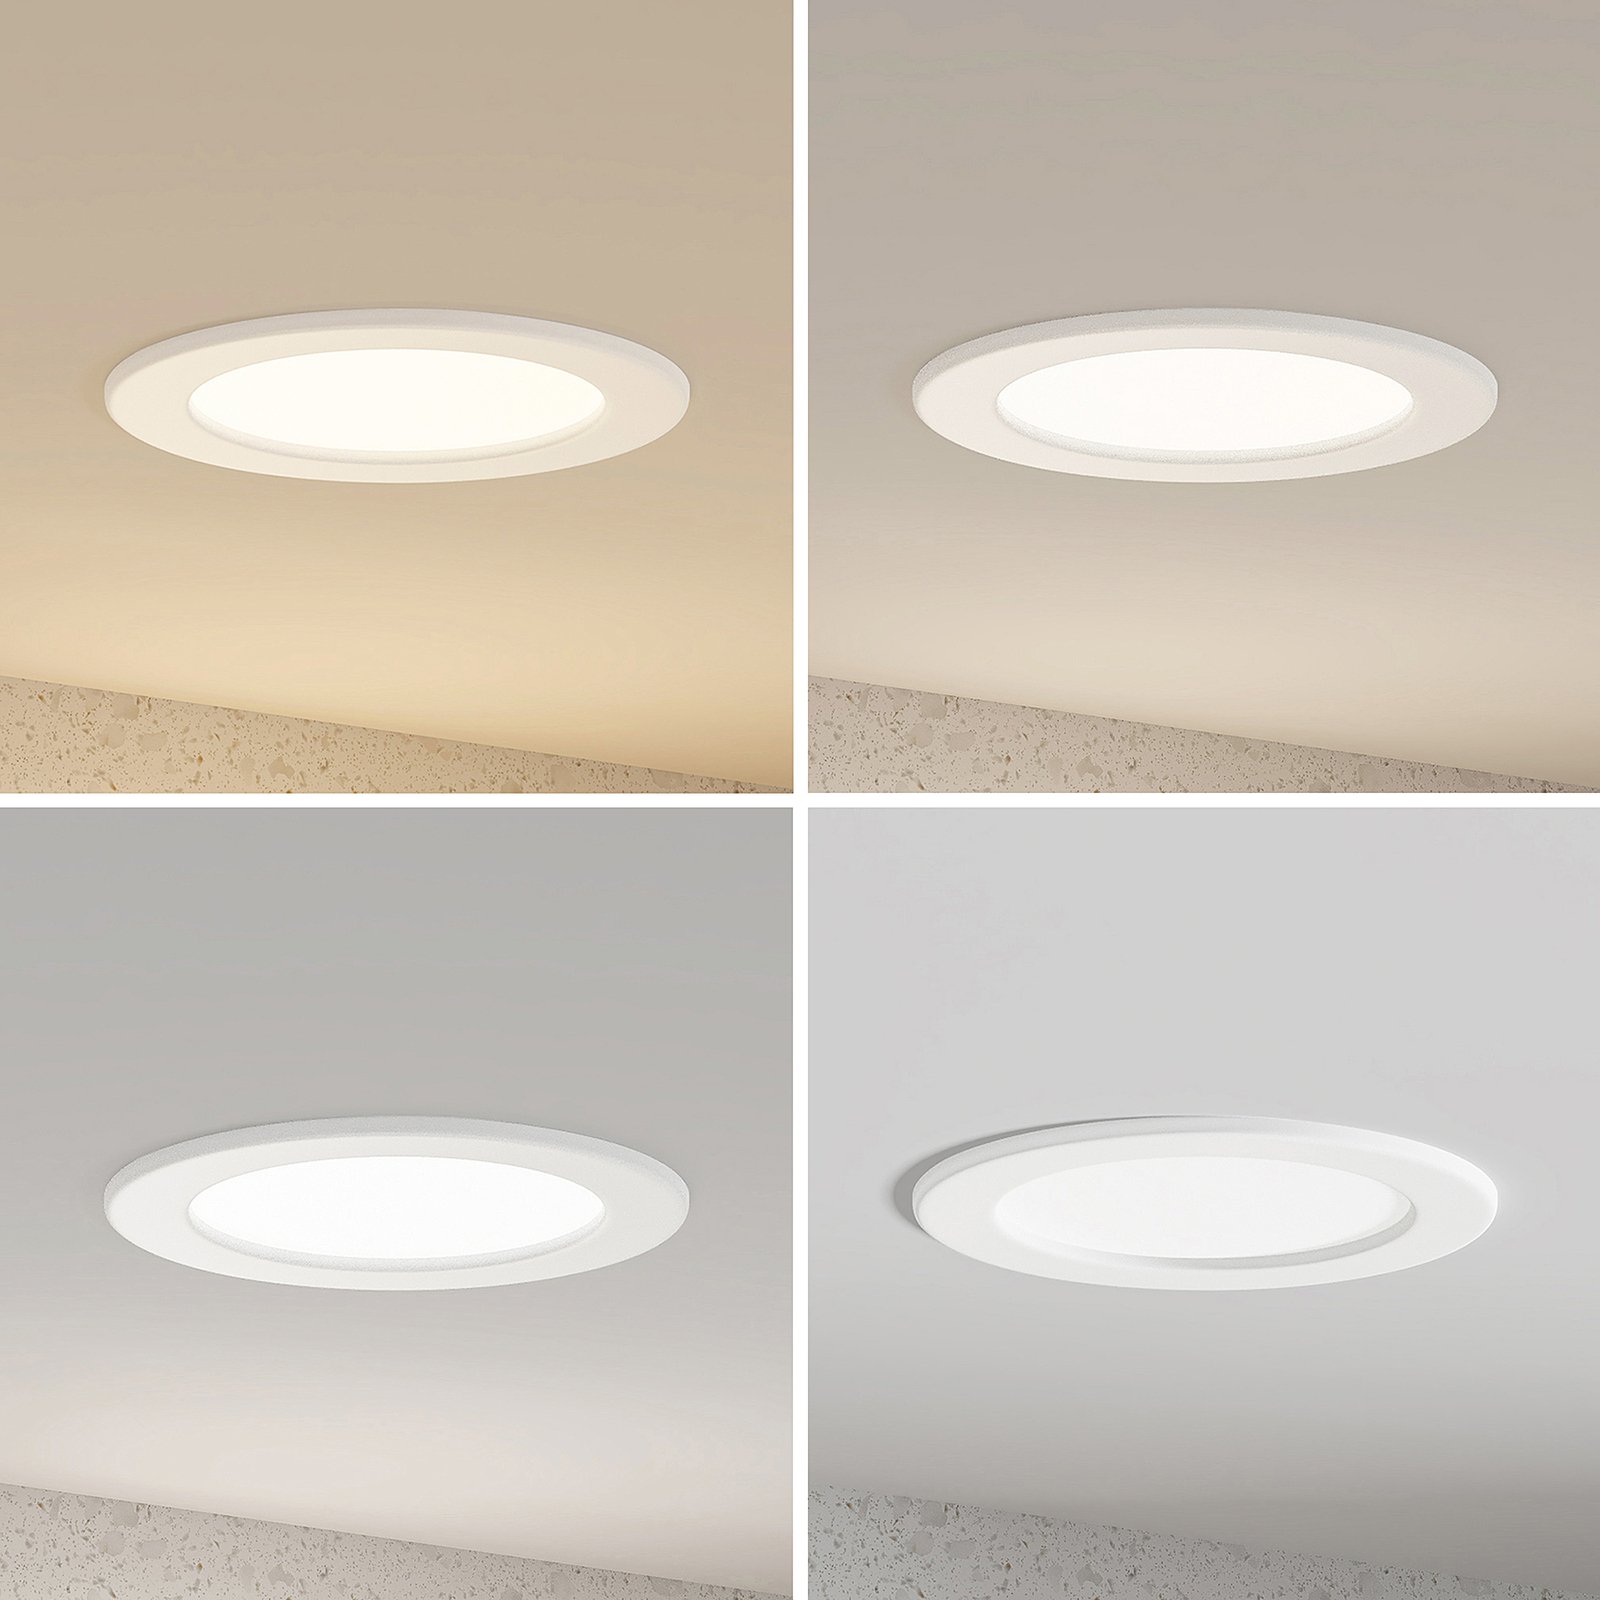 Prios LED recessed light Cadance, white, 17 cm, 10 units, dimmable